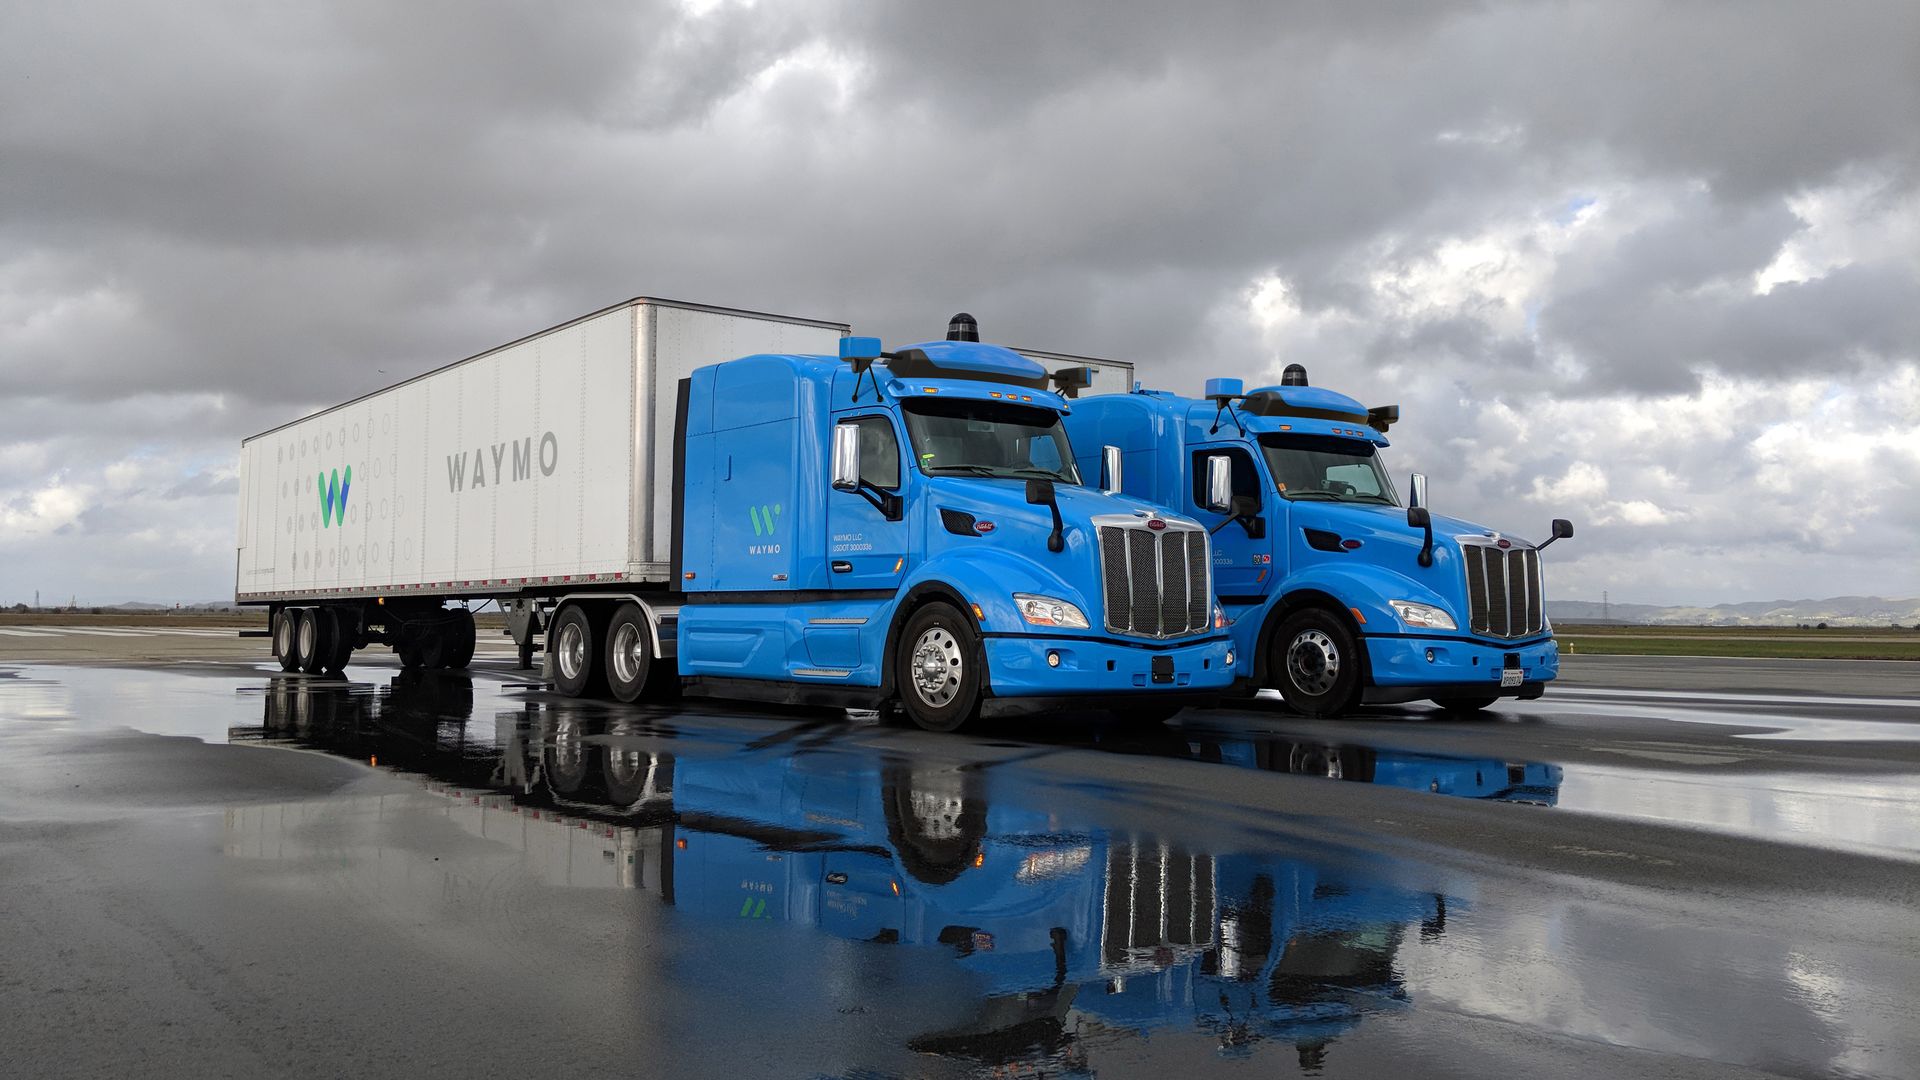 image of 2 commercial trucks operated by Waymo's self-driving technology